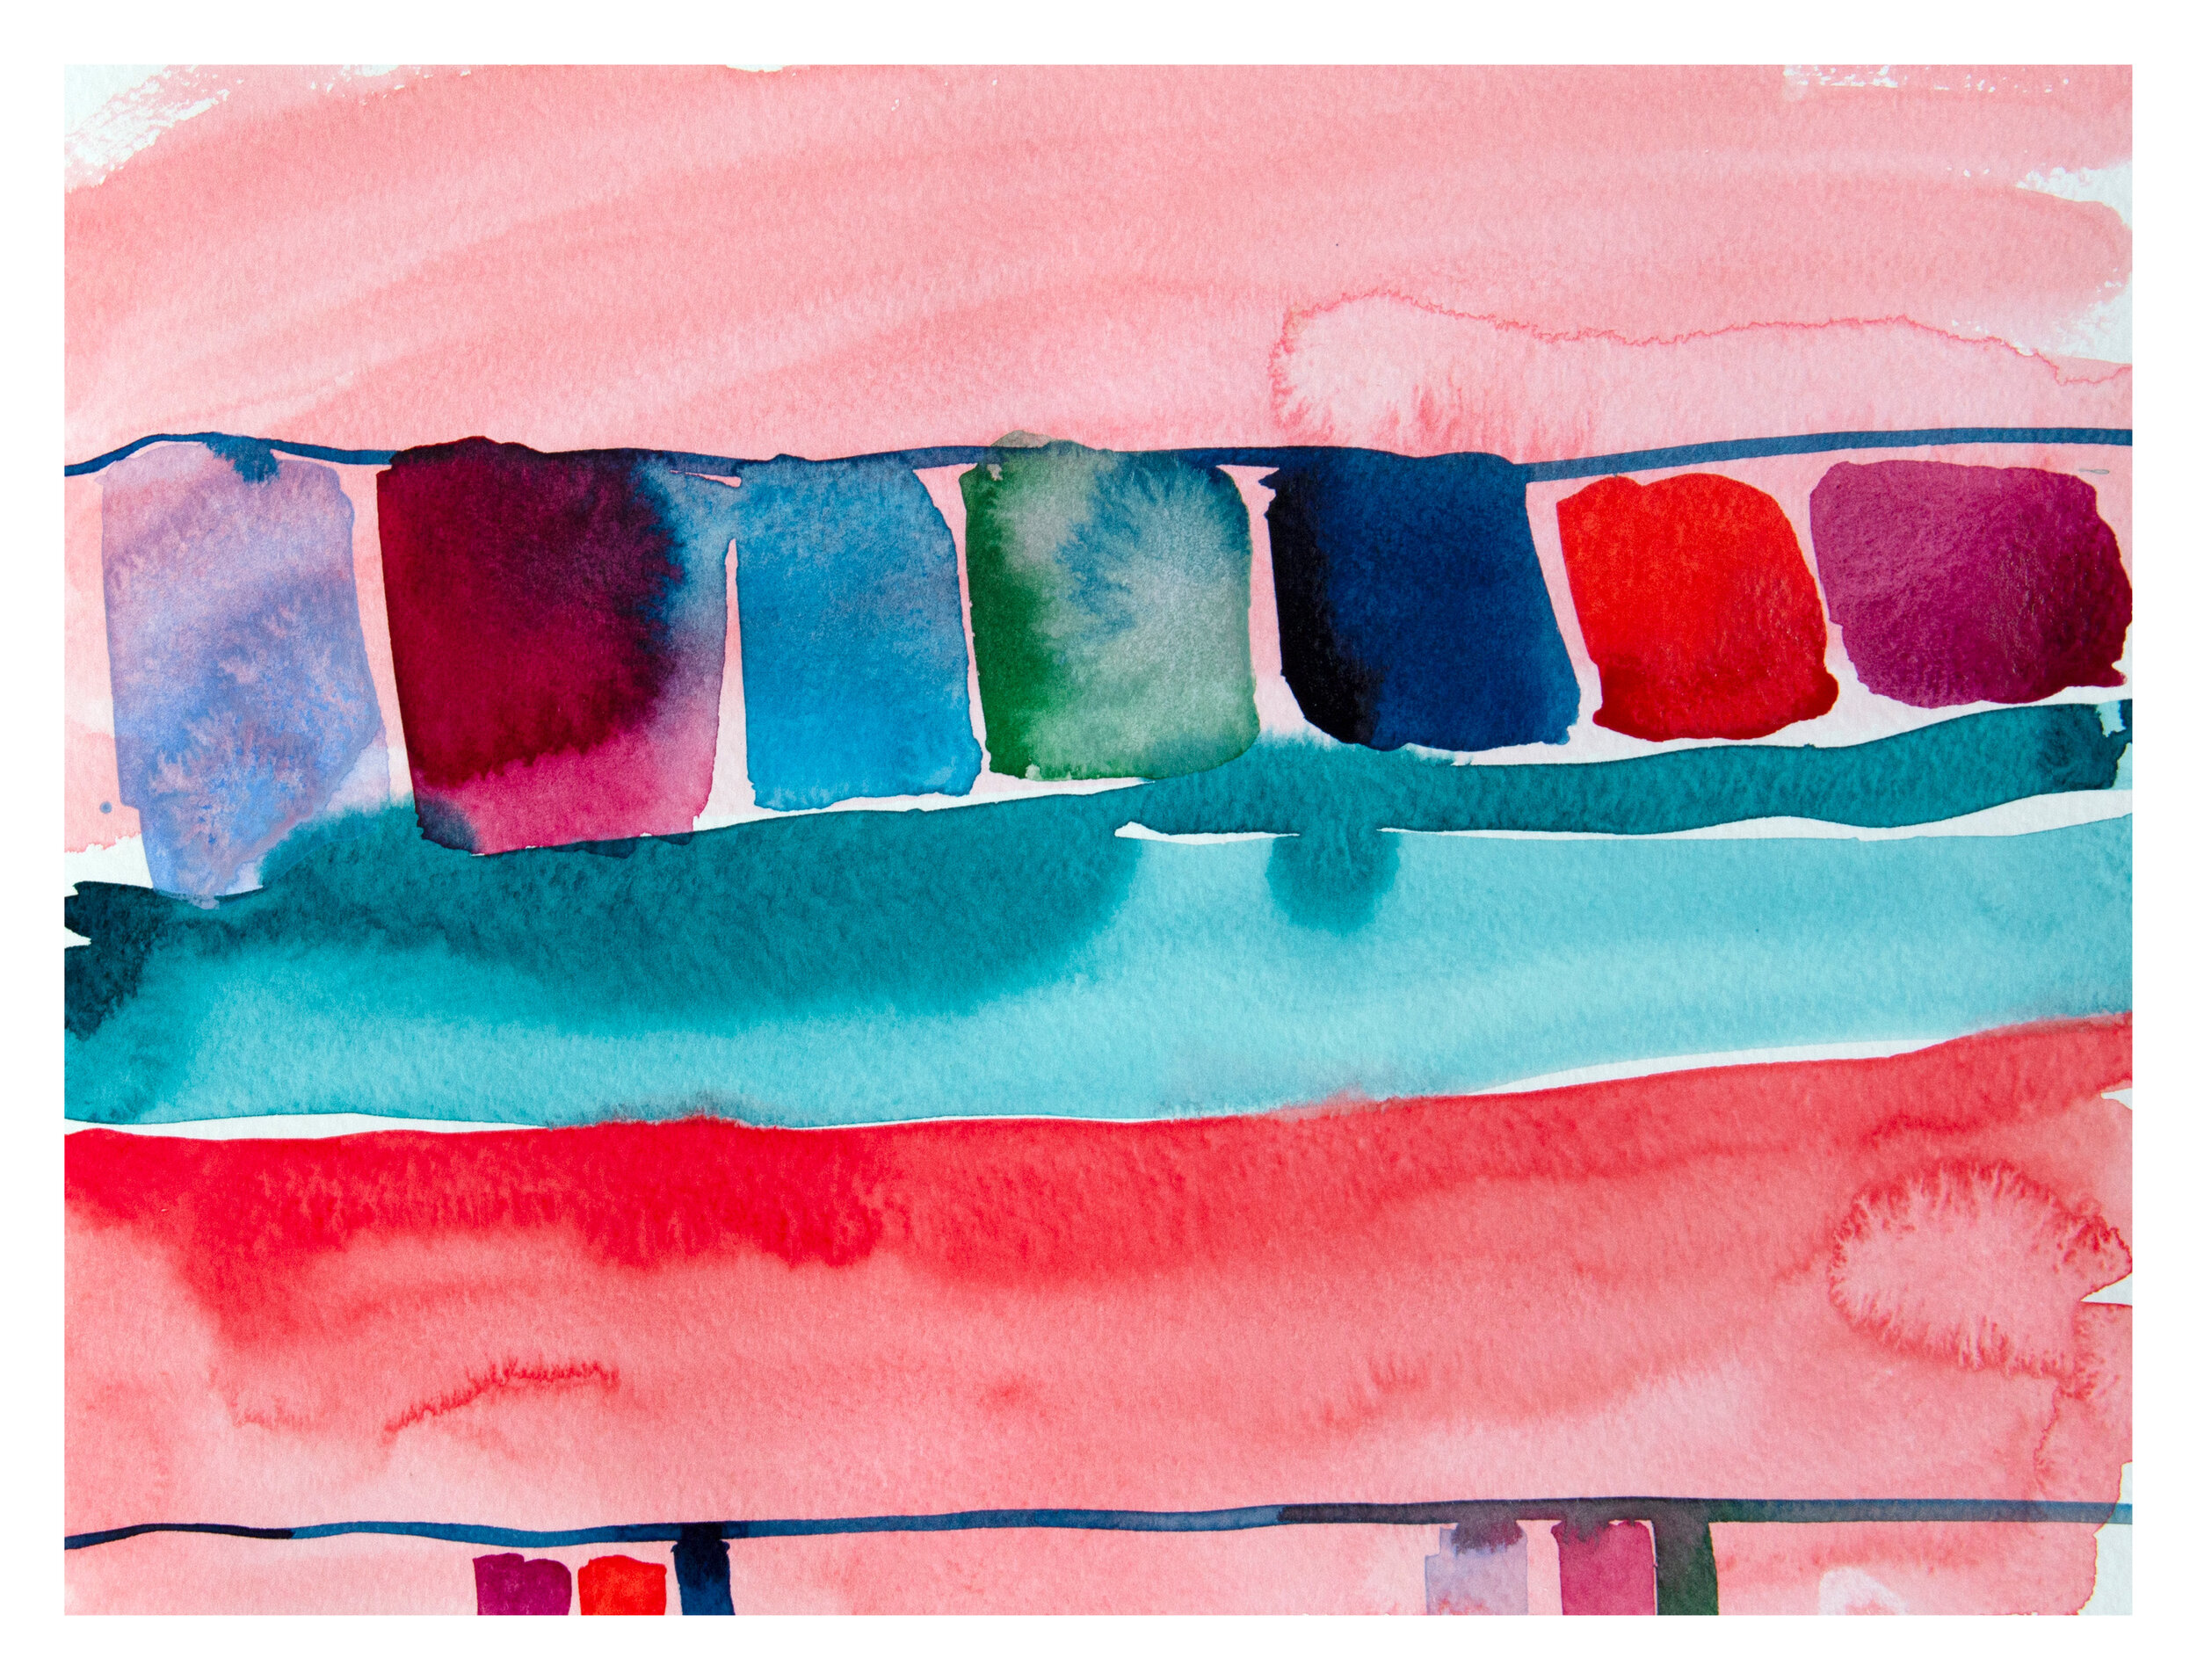 100 Watercolors for Spring (#66)